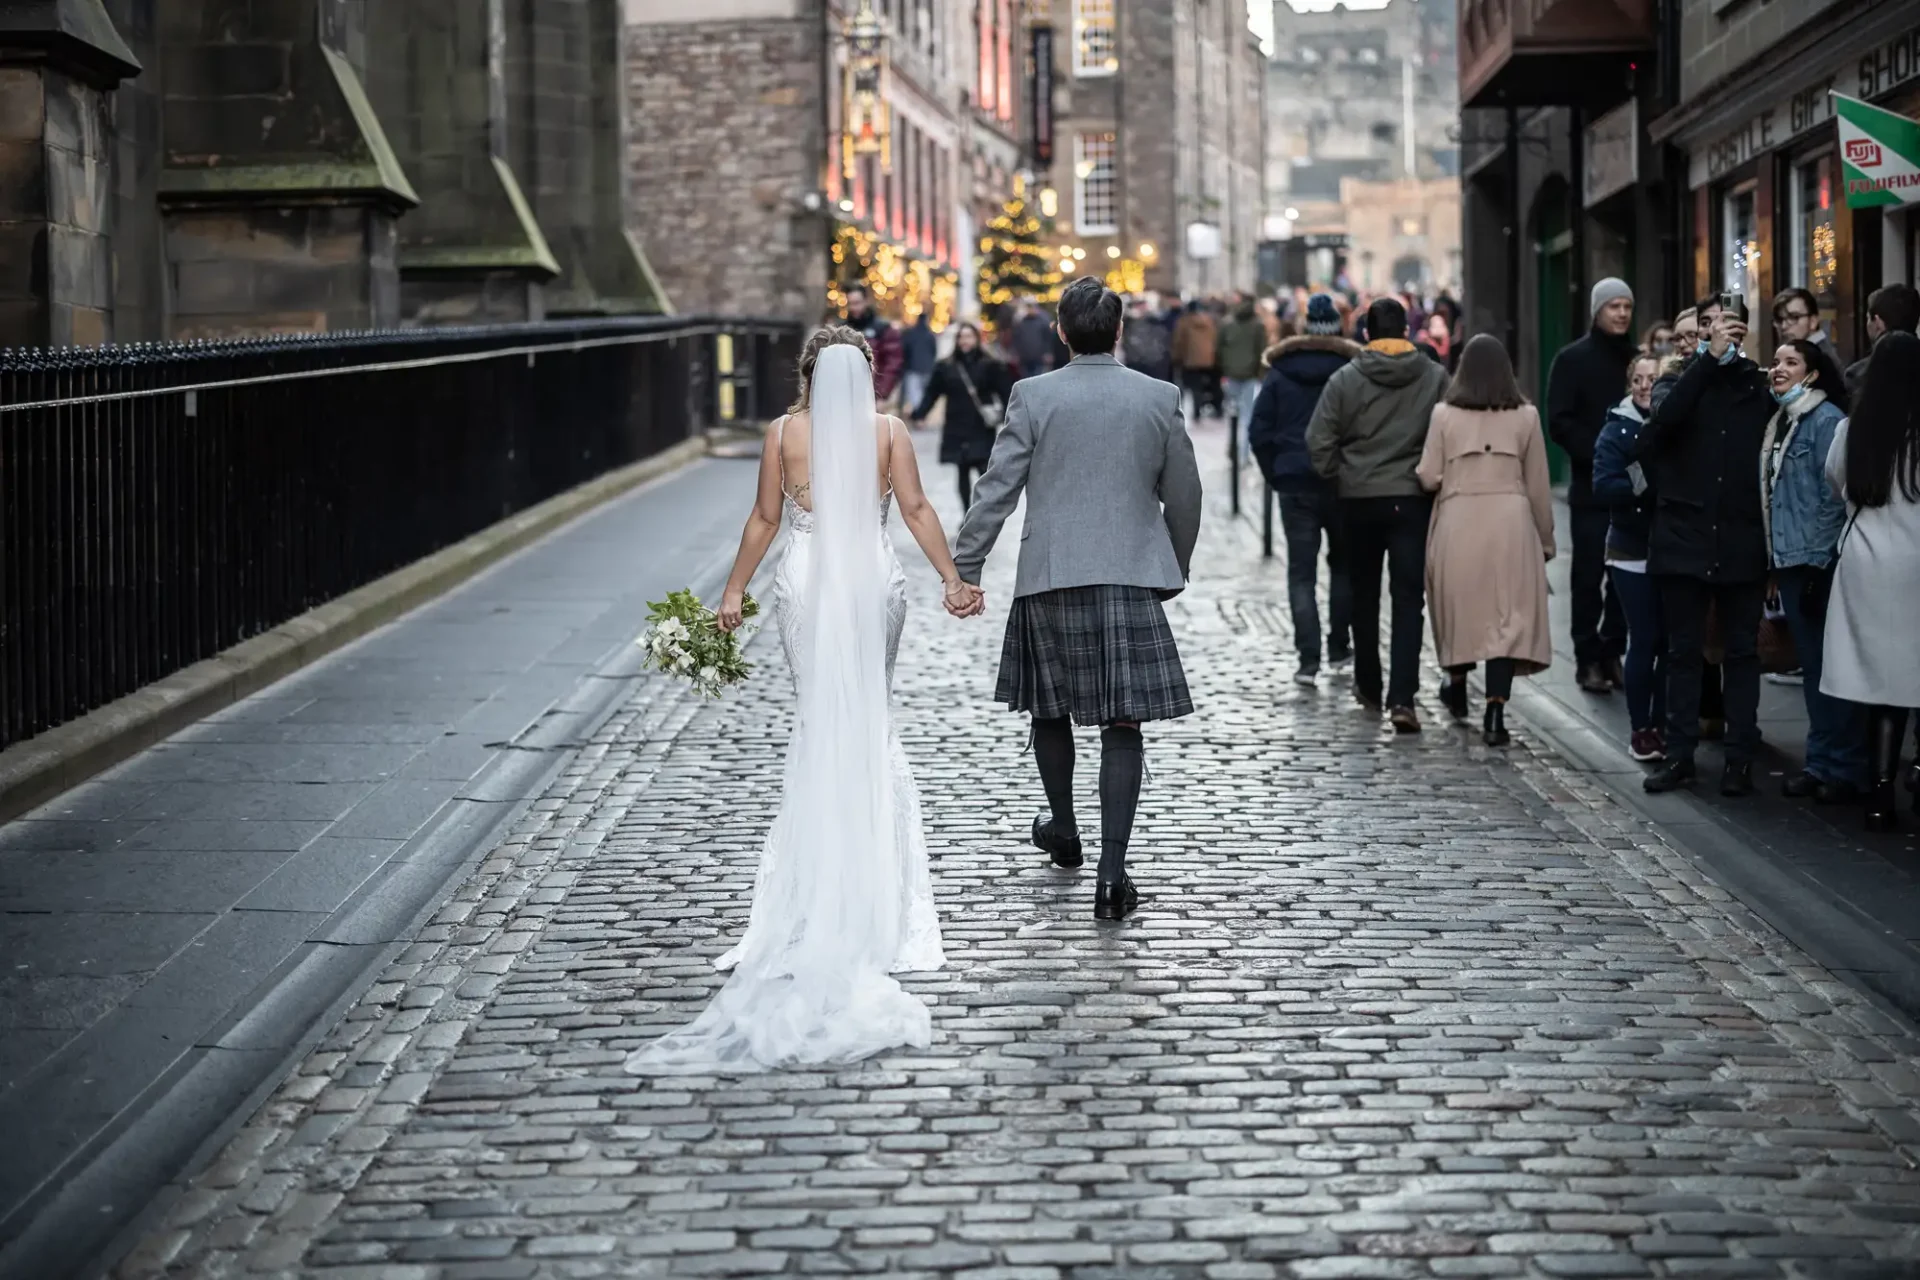 A bride in a white gown and a groom in a kilt holding hands, walking down a cobblestone street lined with pedestrians.